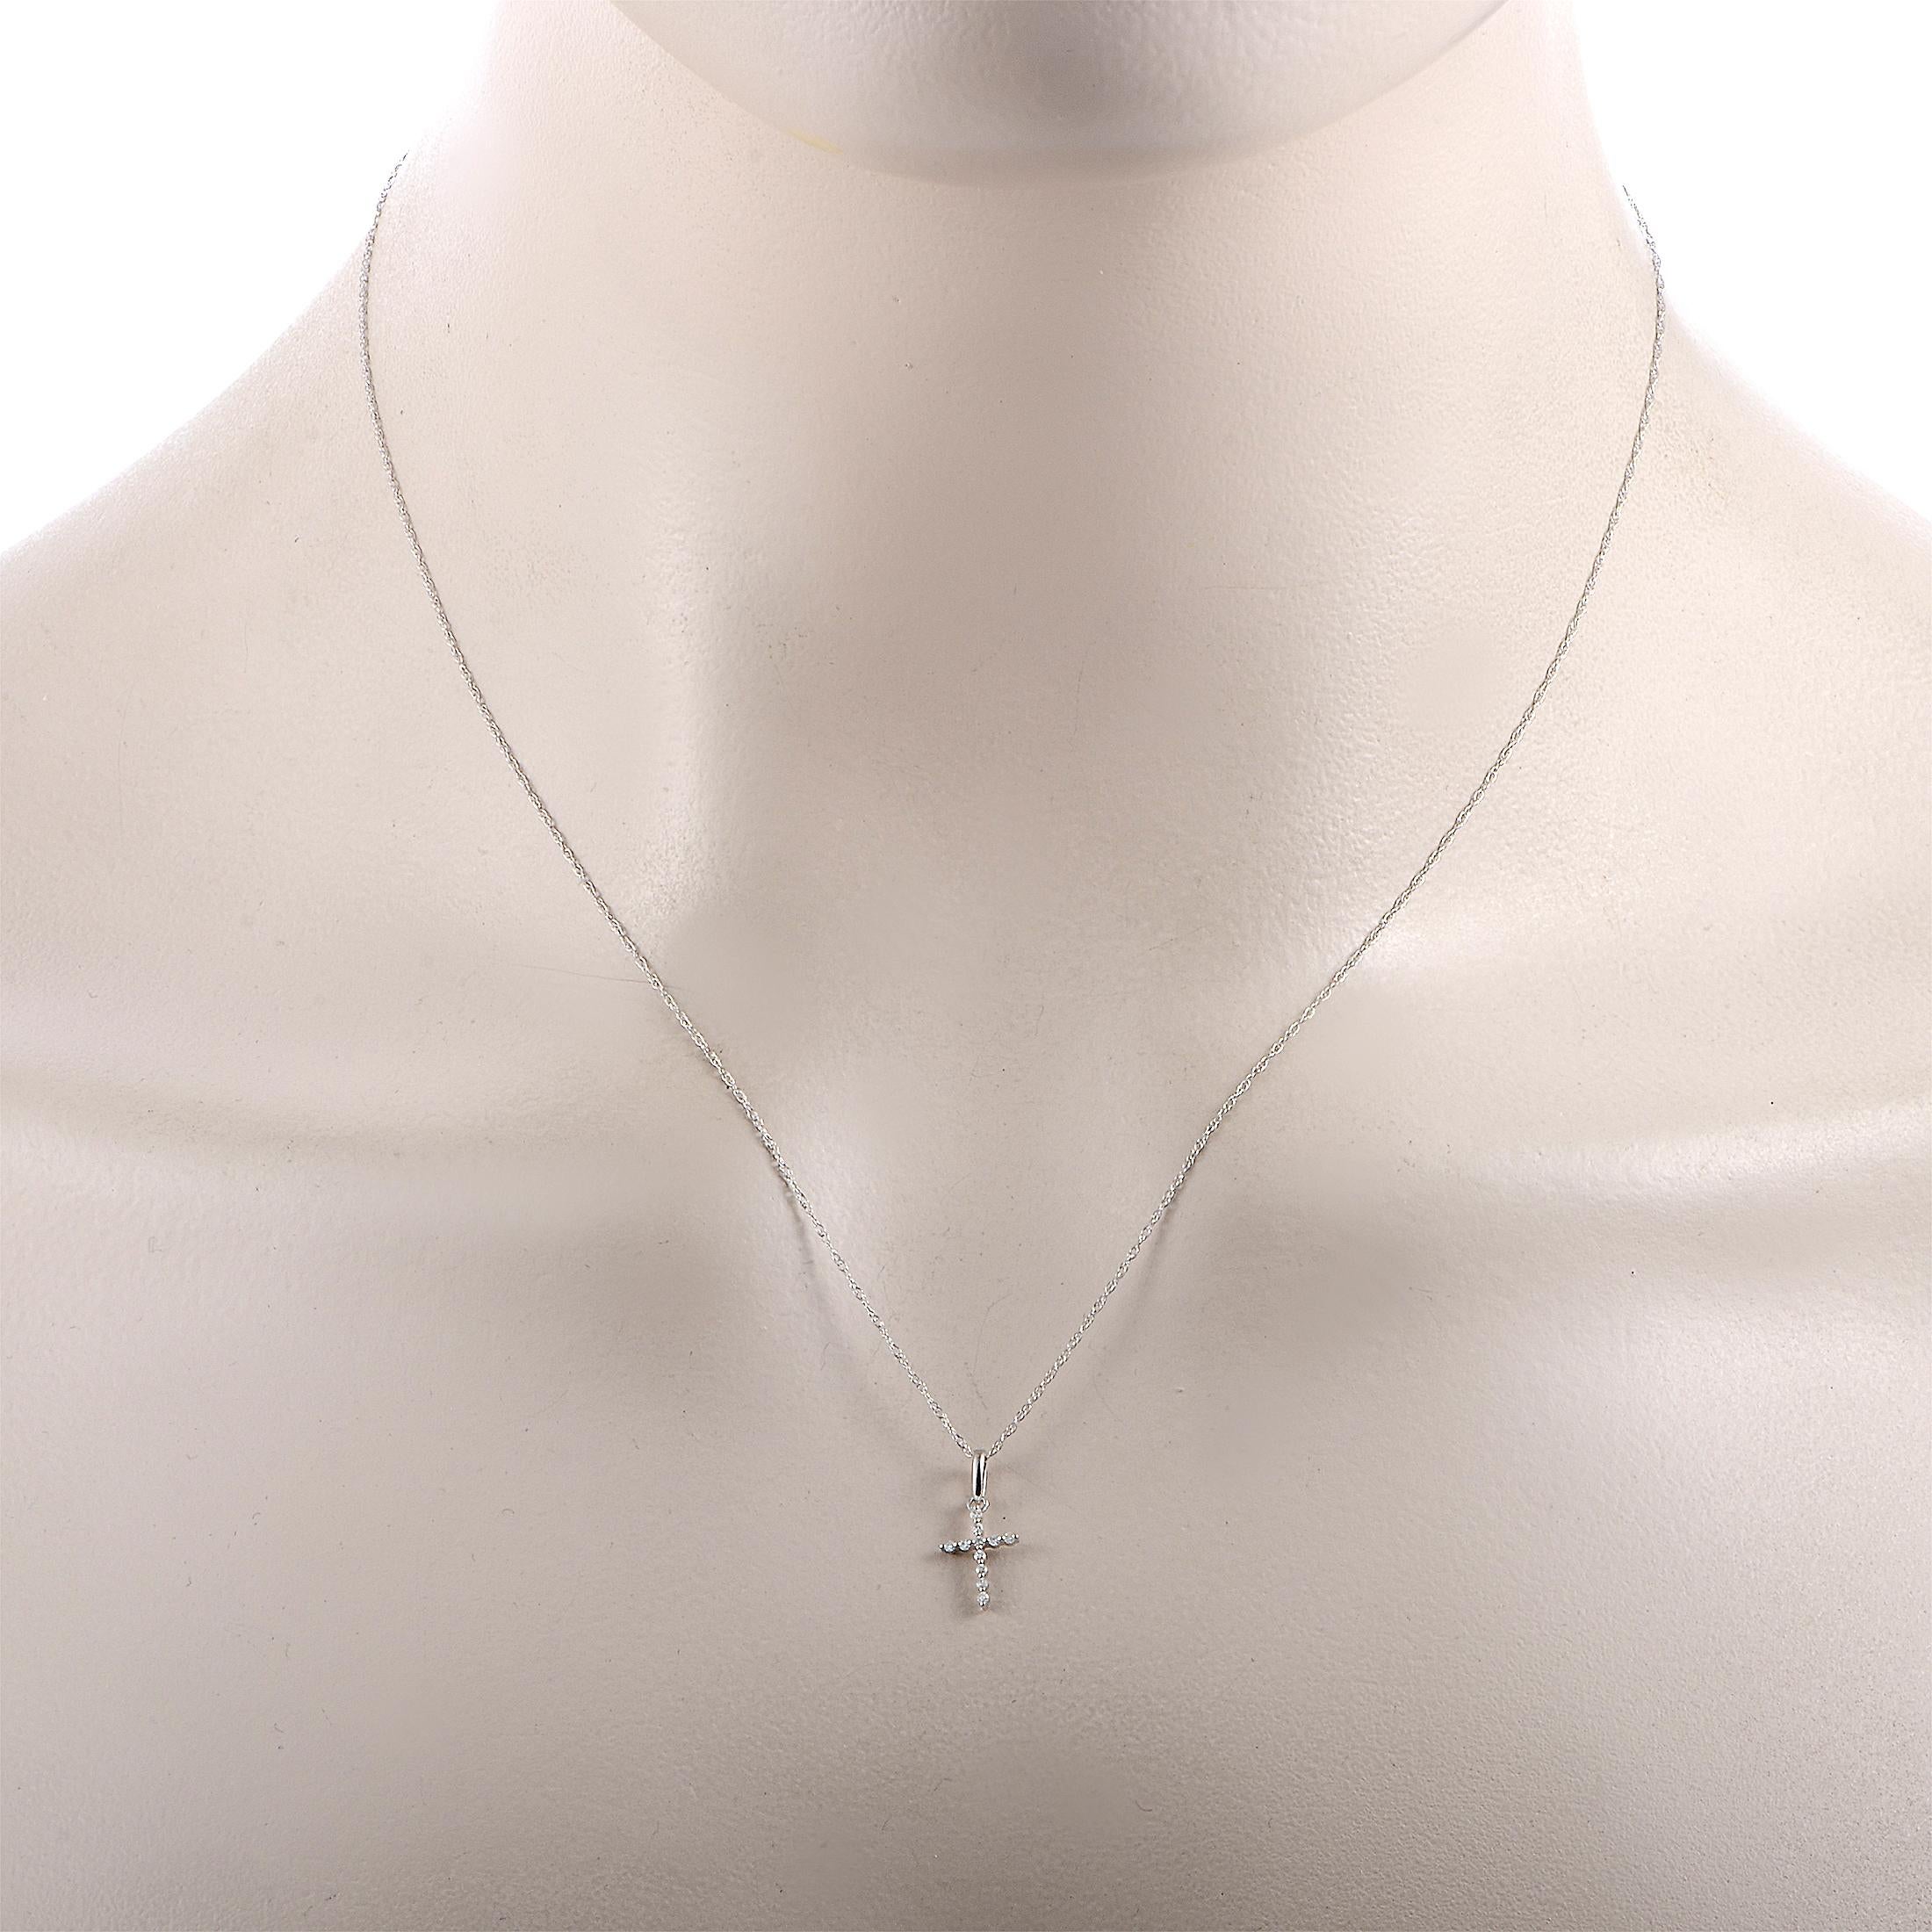 This LB Exclusive necklace is made of 14K white gold and set with a total of 0.05 carats of diamonds. Weighing 0.7 grams, the necklace is presented with an 18” chain featuring spring ring closure and a cross pendant that measures 0.50” in length and